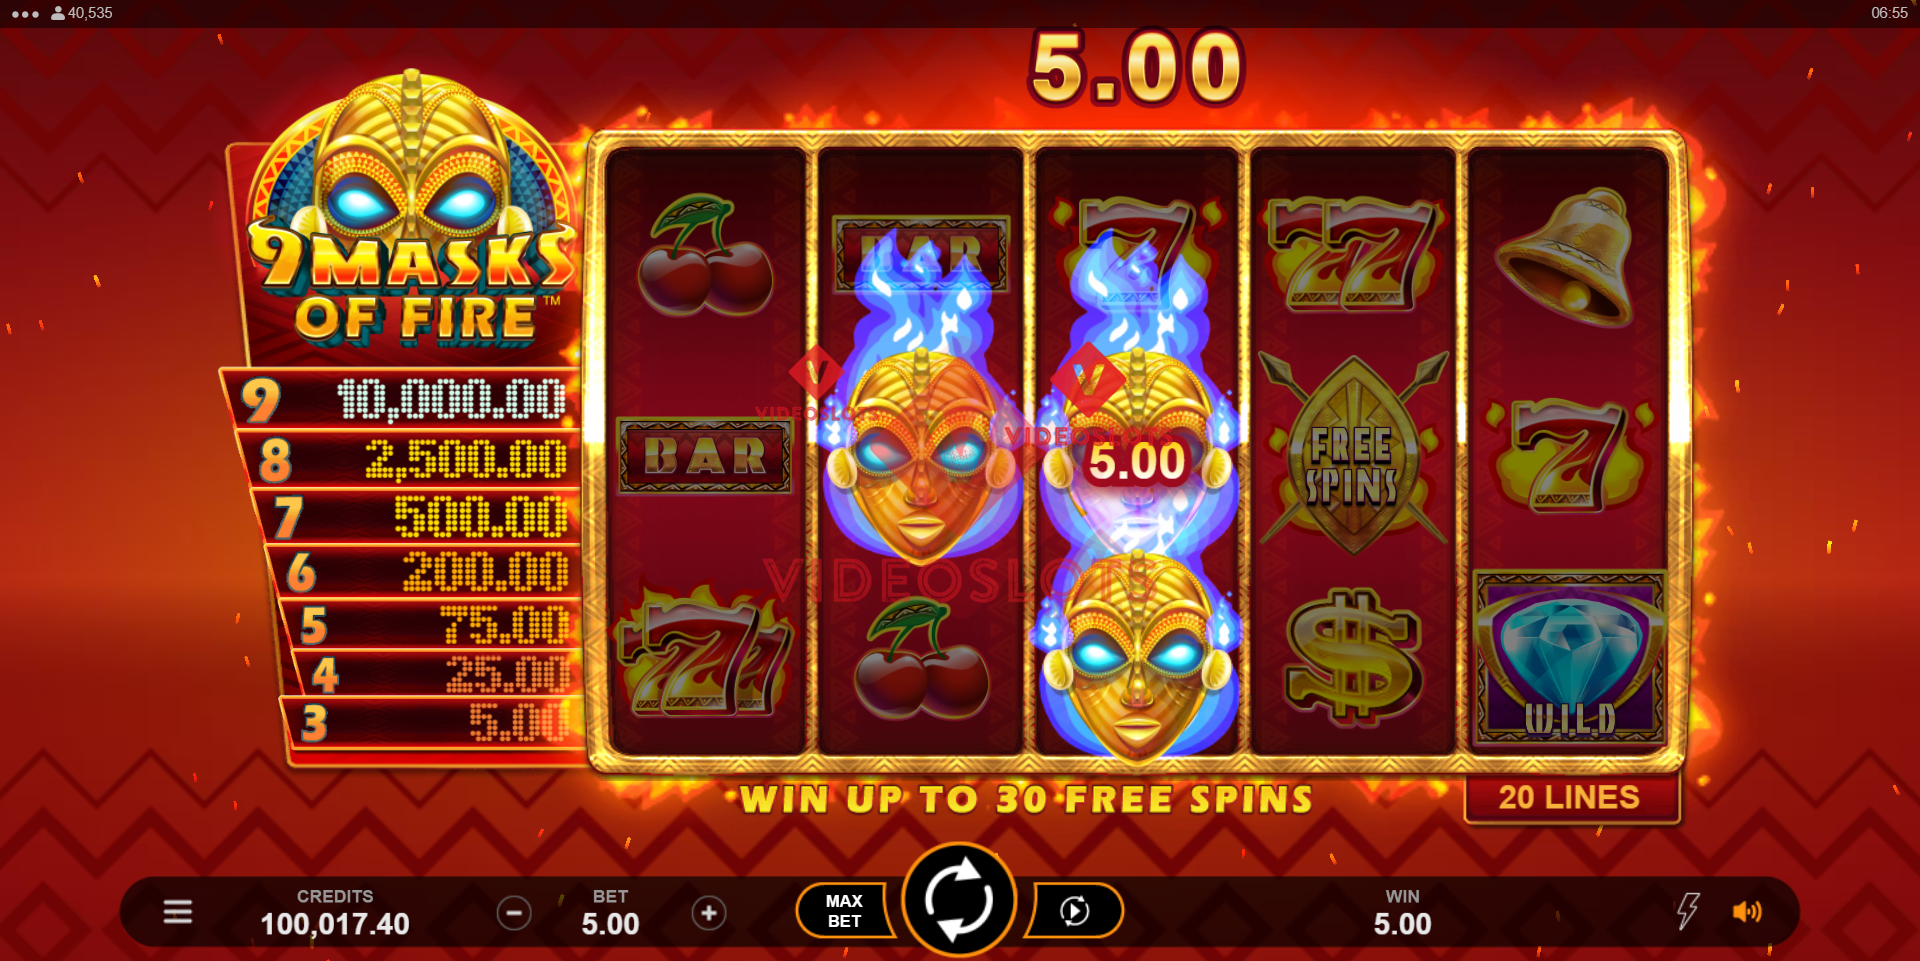 Base Game for 9 Masks of Fire slot for Microgaming